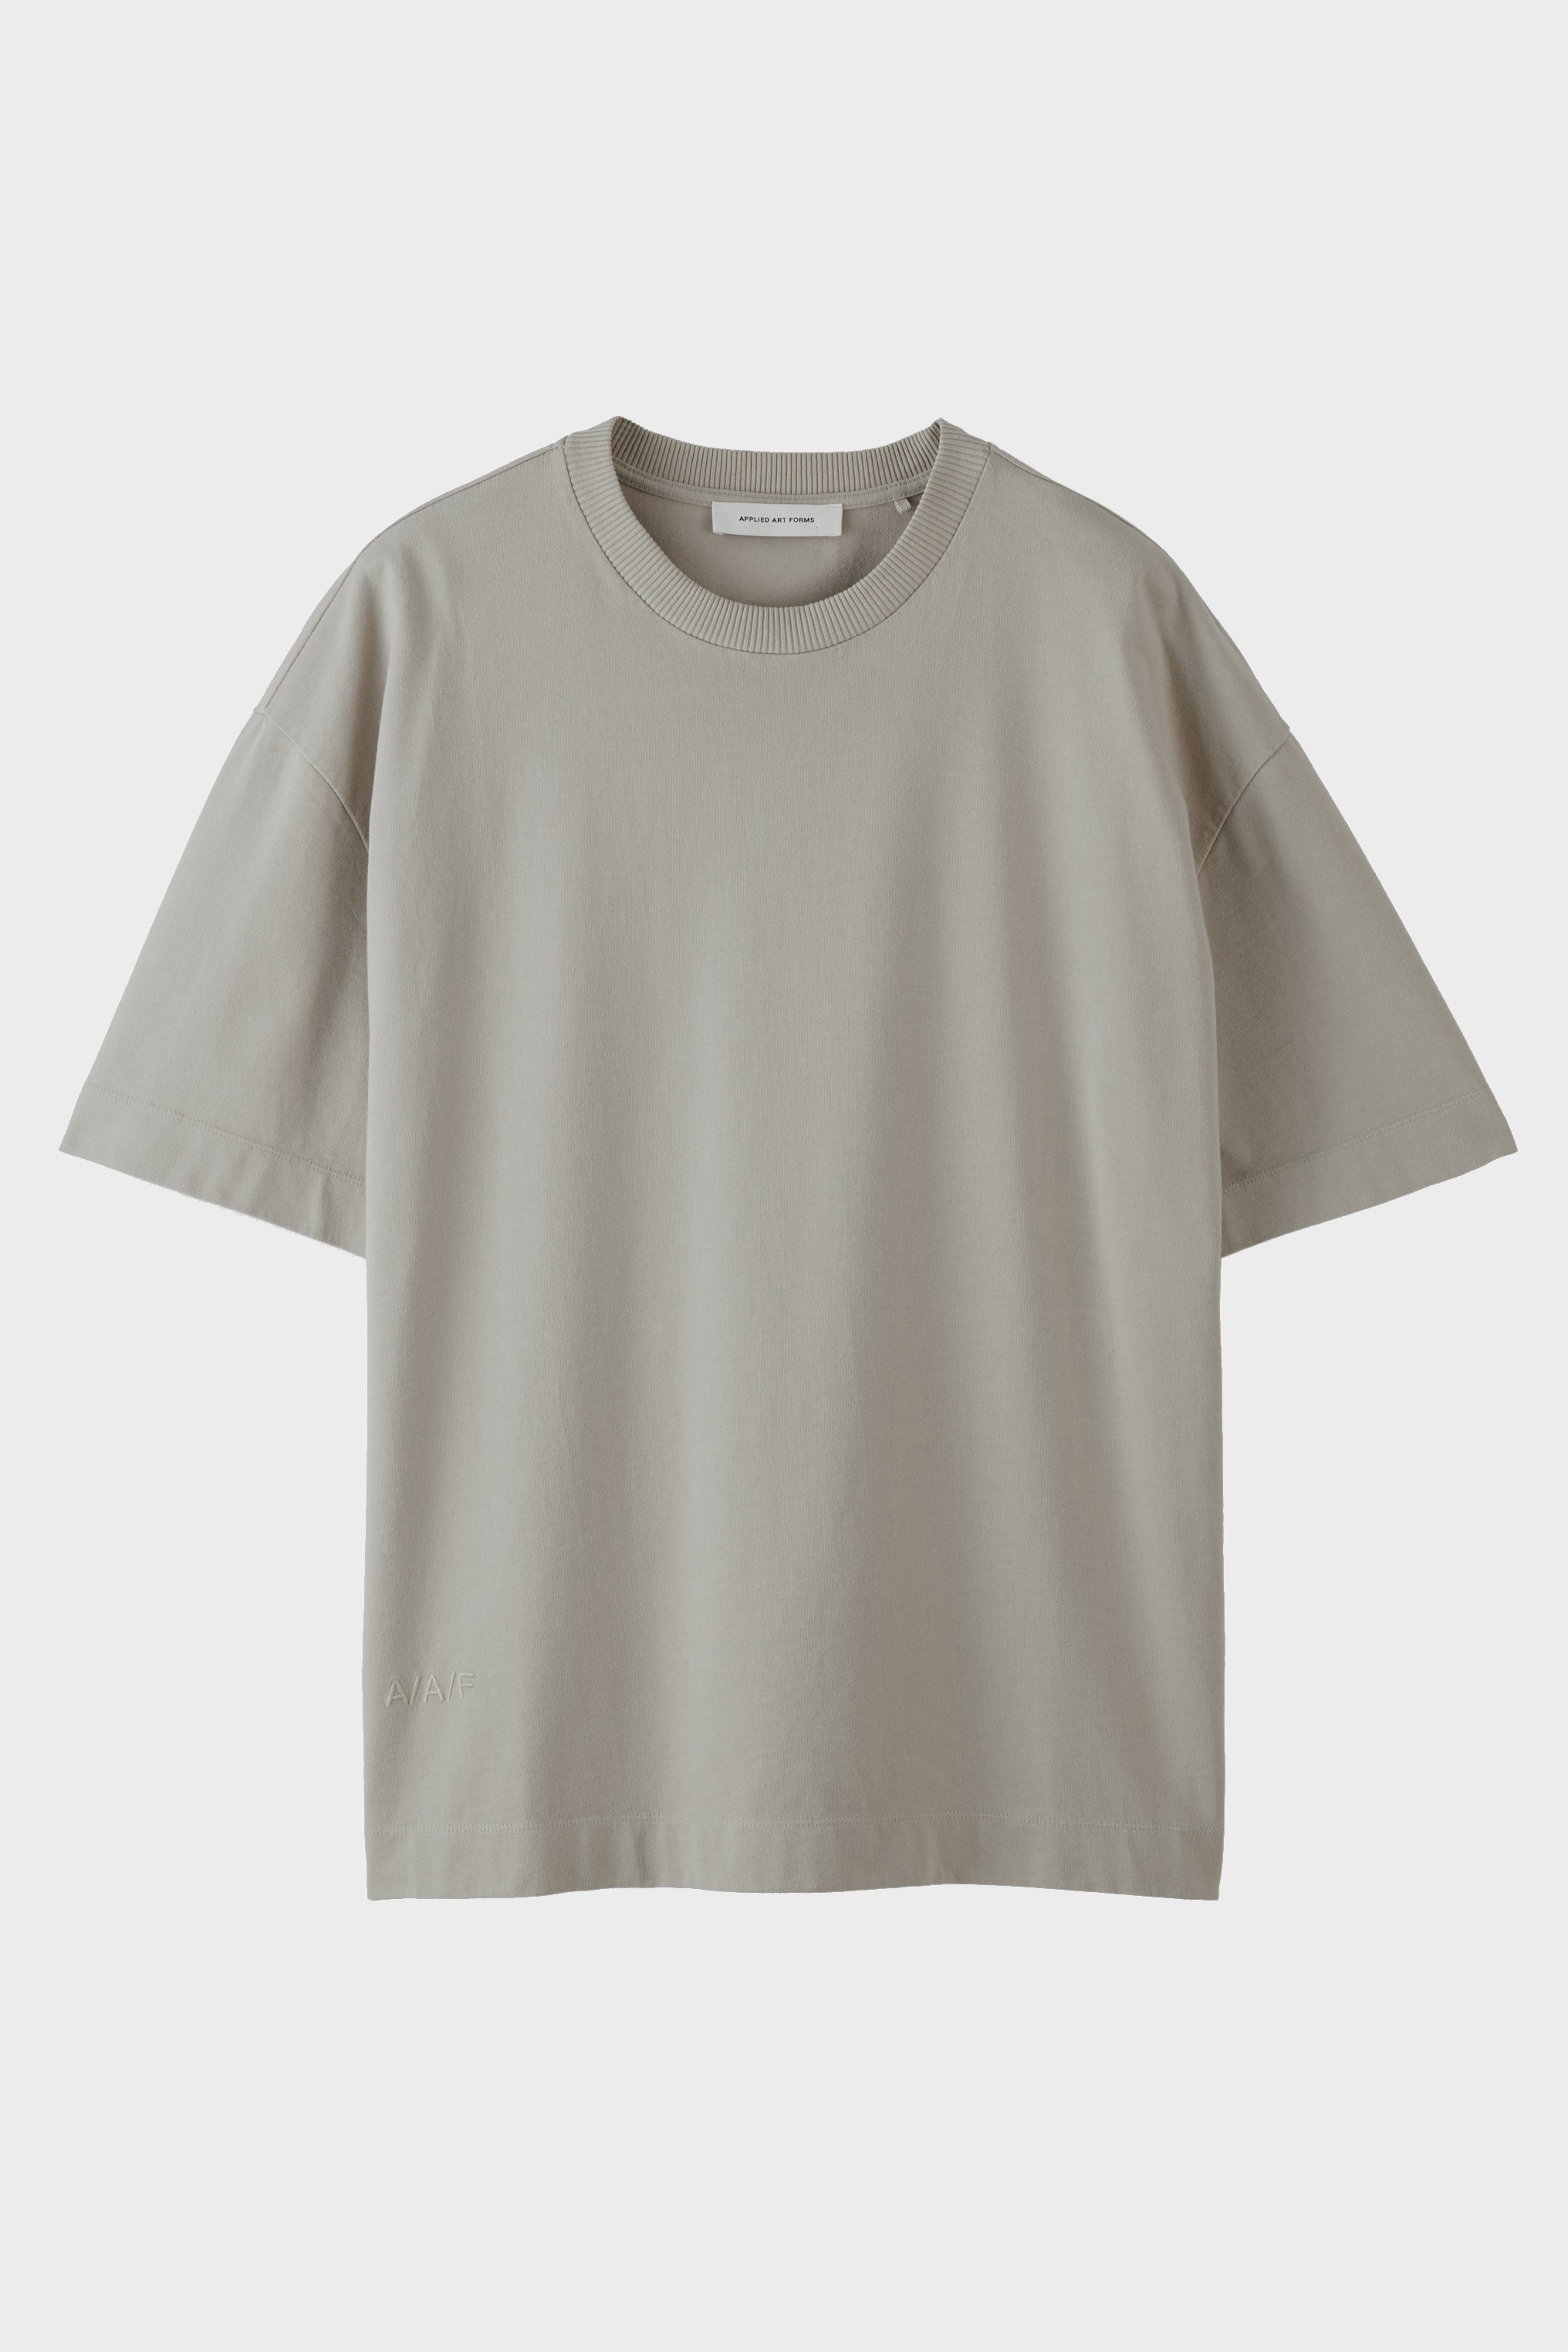 APPLIED ART FORMS Oversize T-Shirt in Ghost Grey S